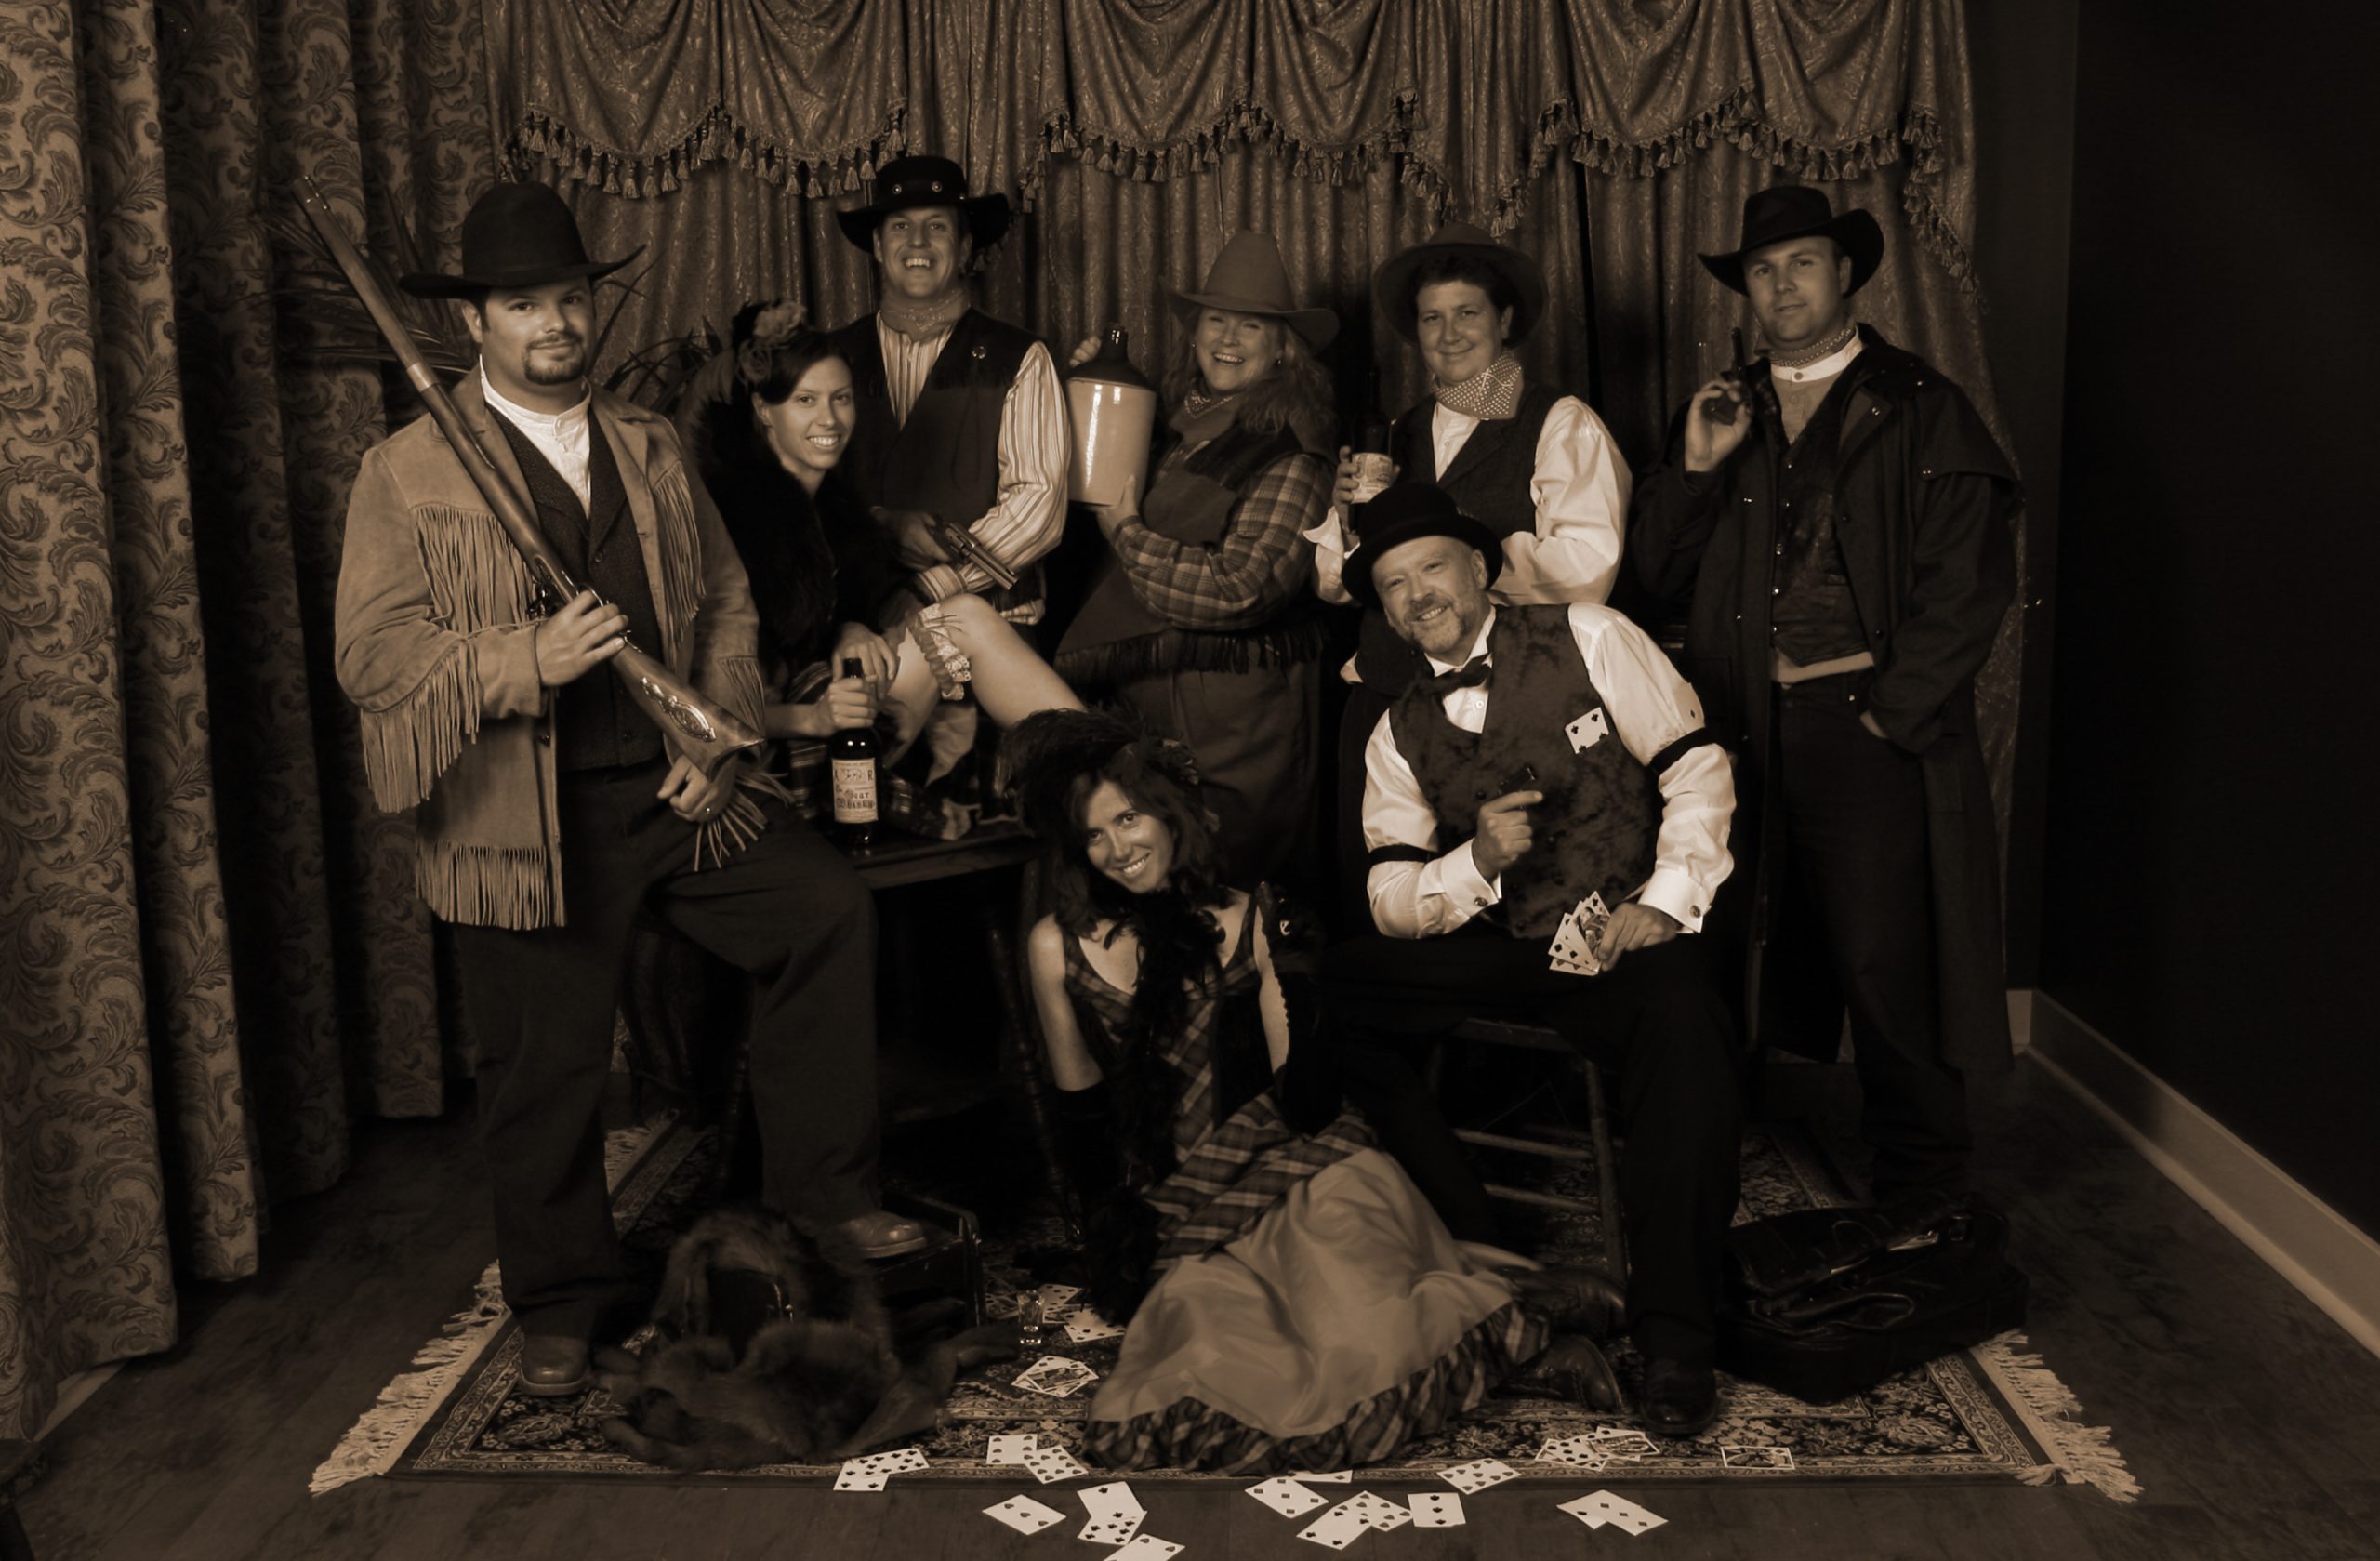 A late 1800's style photo of a group of friends